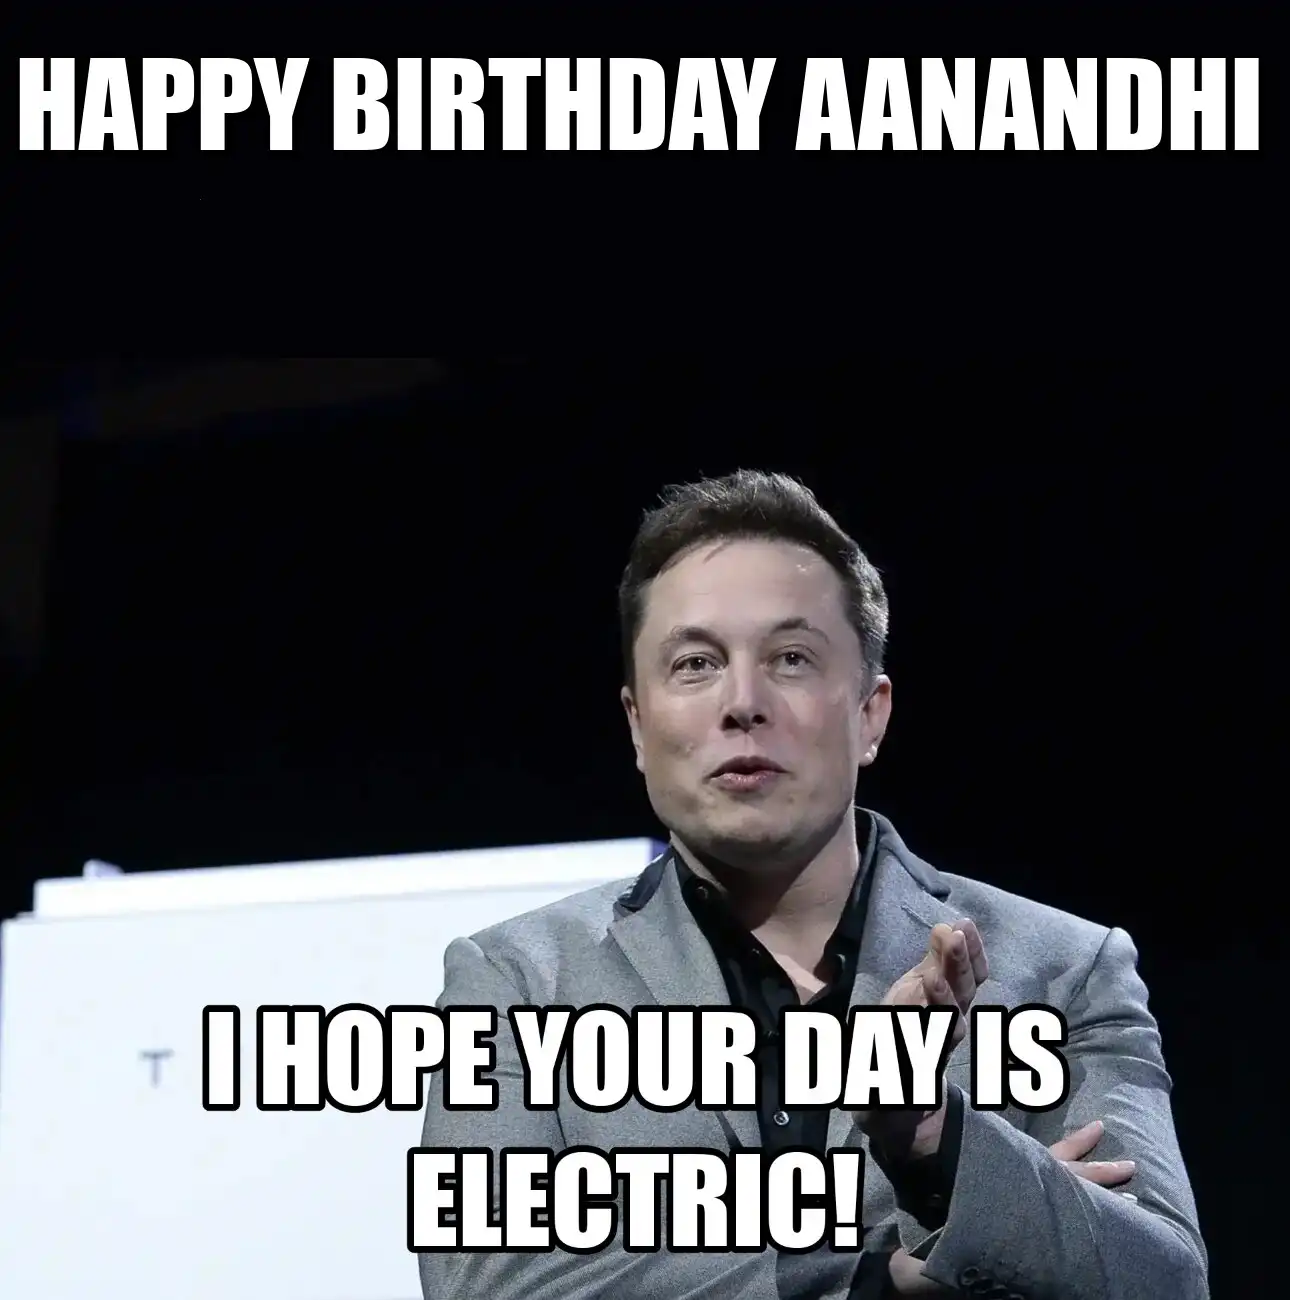 Happy Birthday Aanandhi I Hope Your Day Is Electric Meme